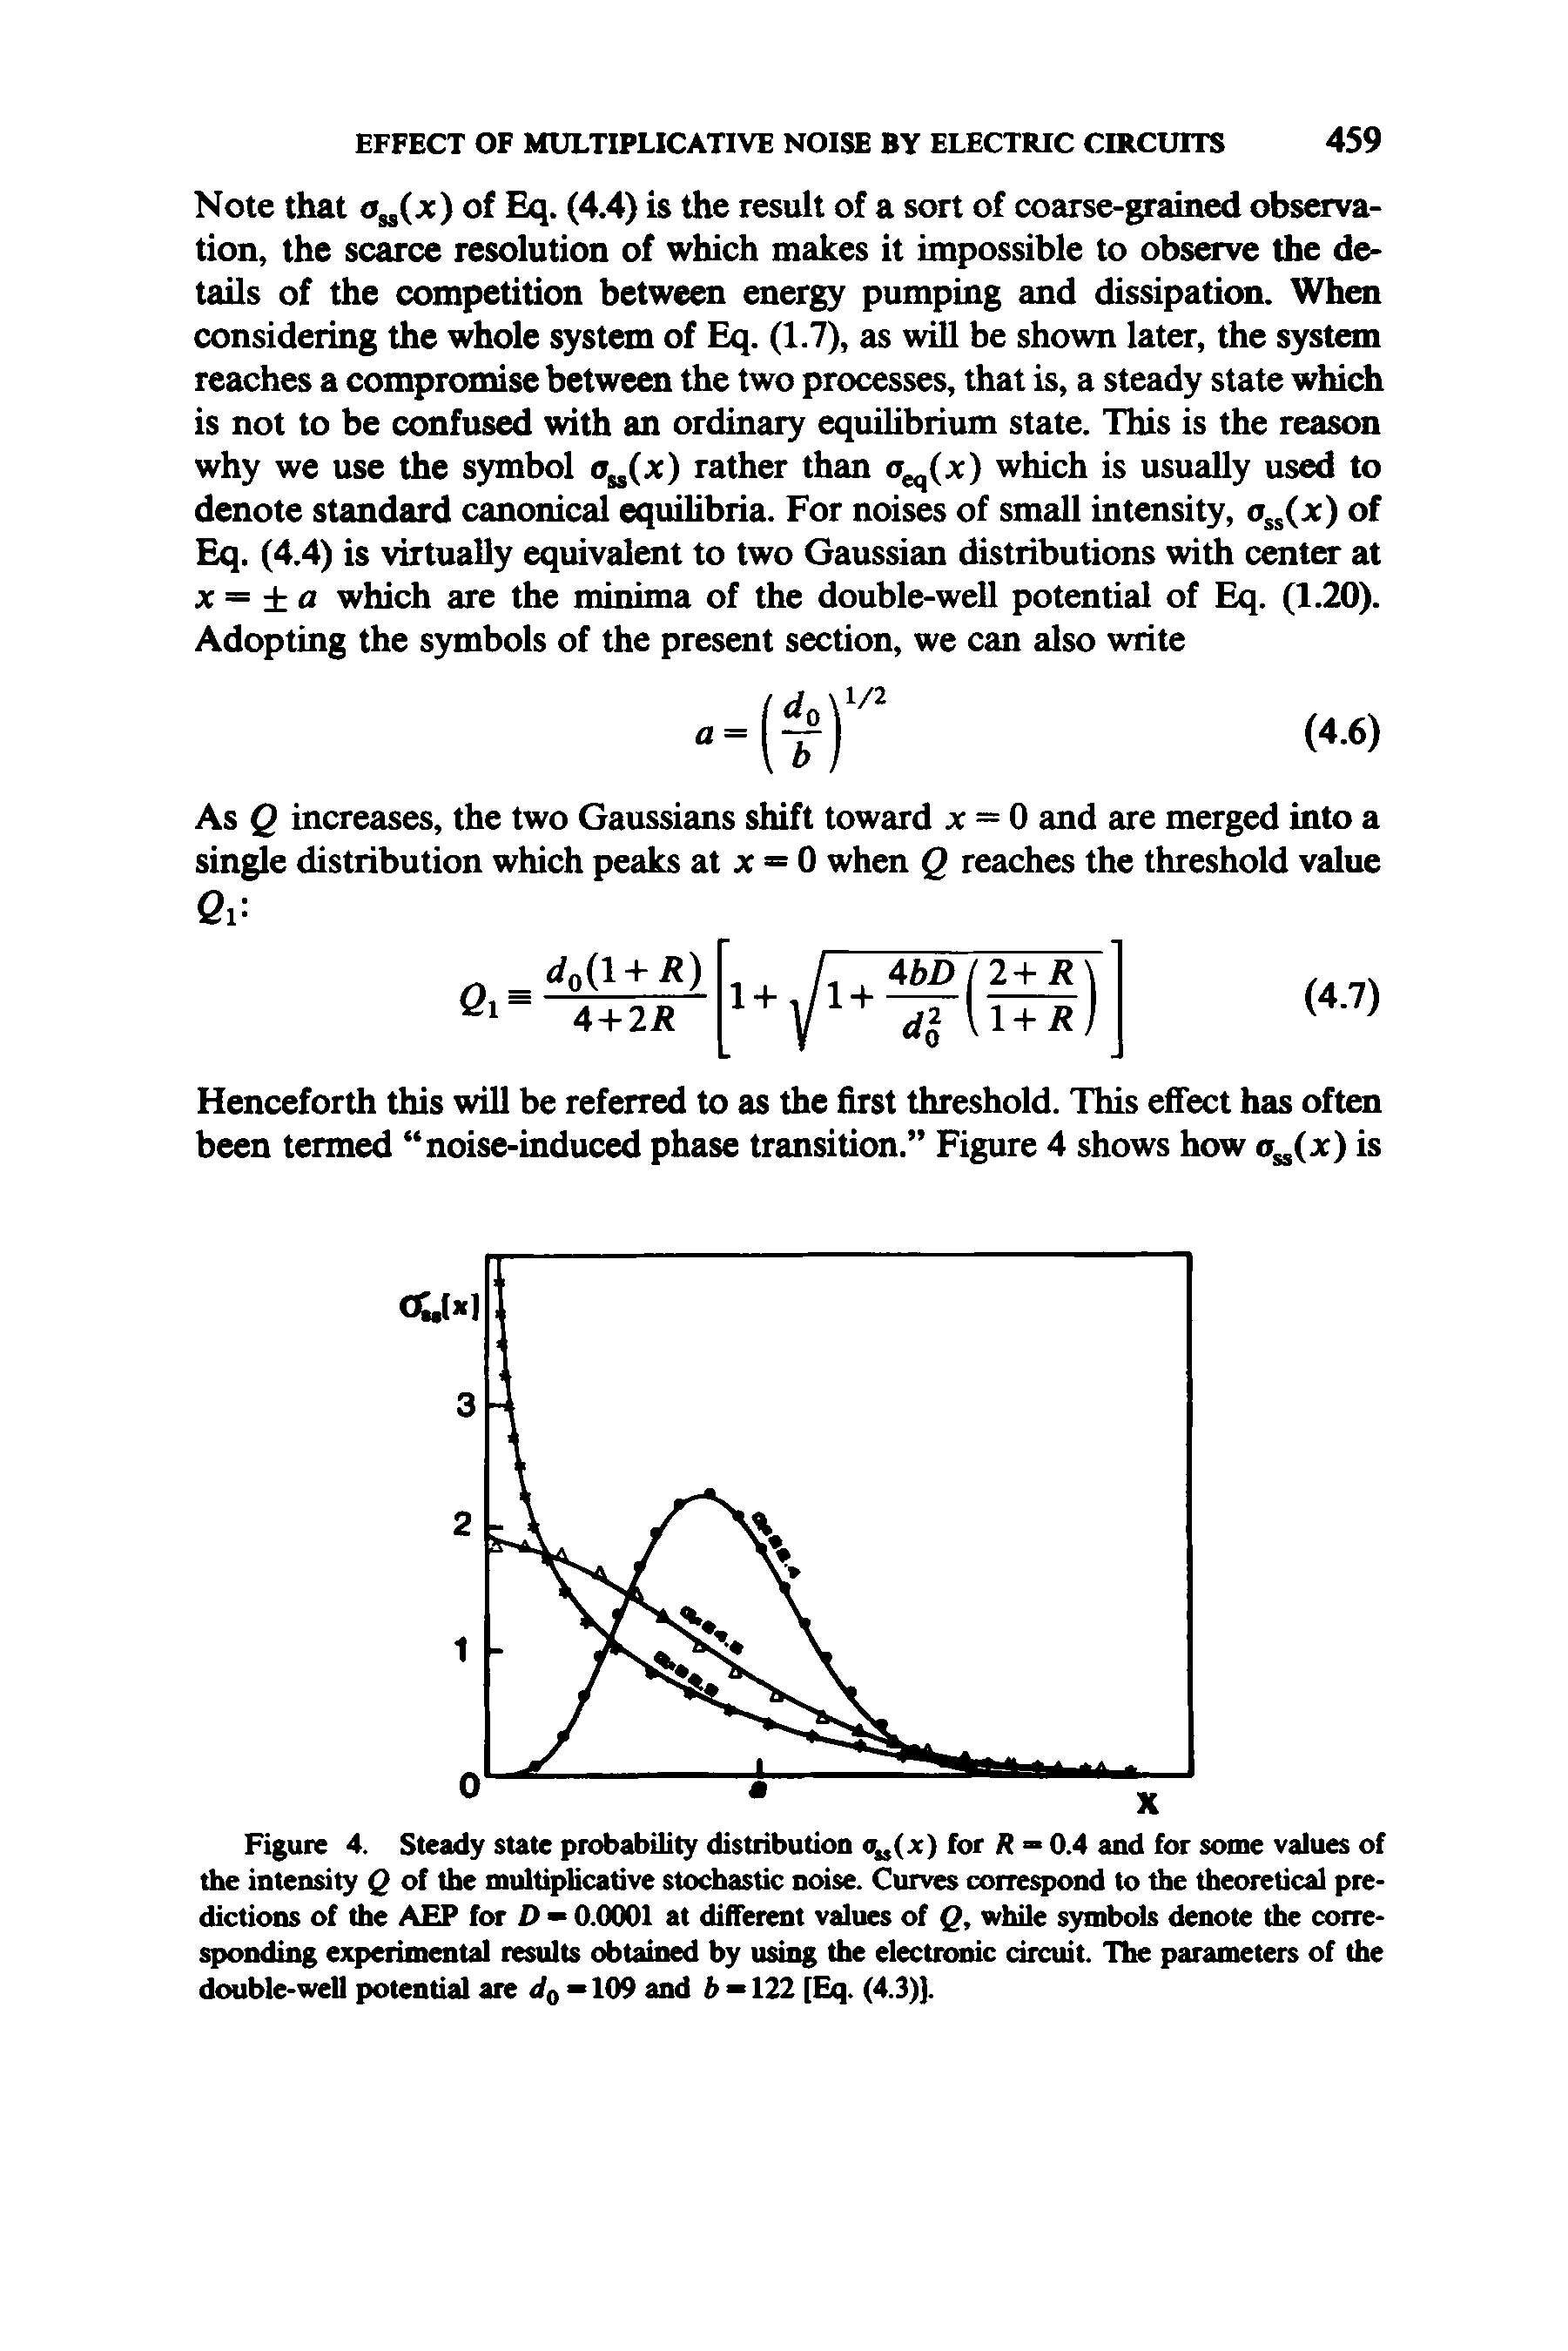 Figure 4. Steady state probability distribution <r (jc) for R — 0.4 and for some values of the intensity Q of the multiplicative stochastic noise. Curves correspond to the theoretical predictions of the AEP for D 0.0001 at different values of Q, while symbols denote the corresponding experimental results obtained by using the electronic circuit. The parameters of the double-well potential are do —109 and b 122 [Eq. (4.3)].